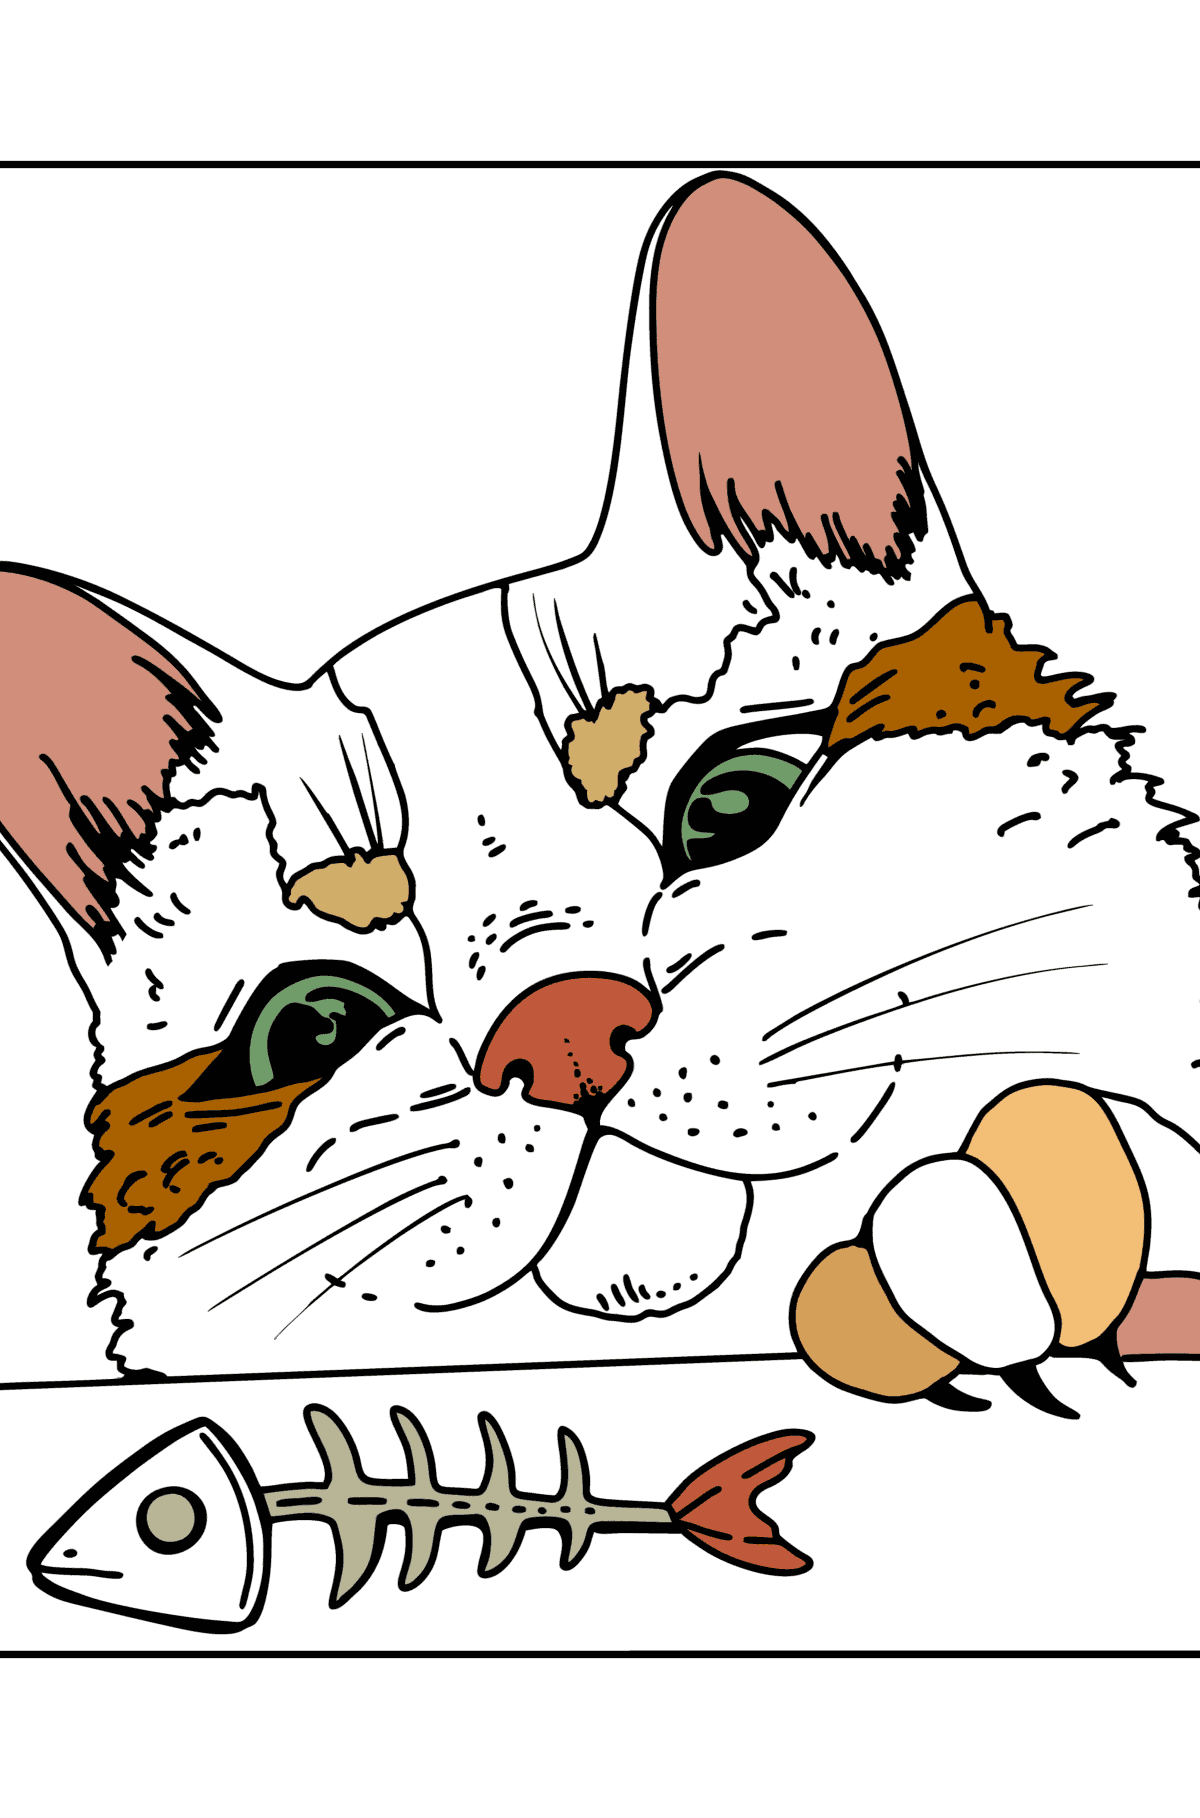 Cat Head coloring page - Coloring Pages for Kids